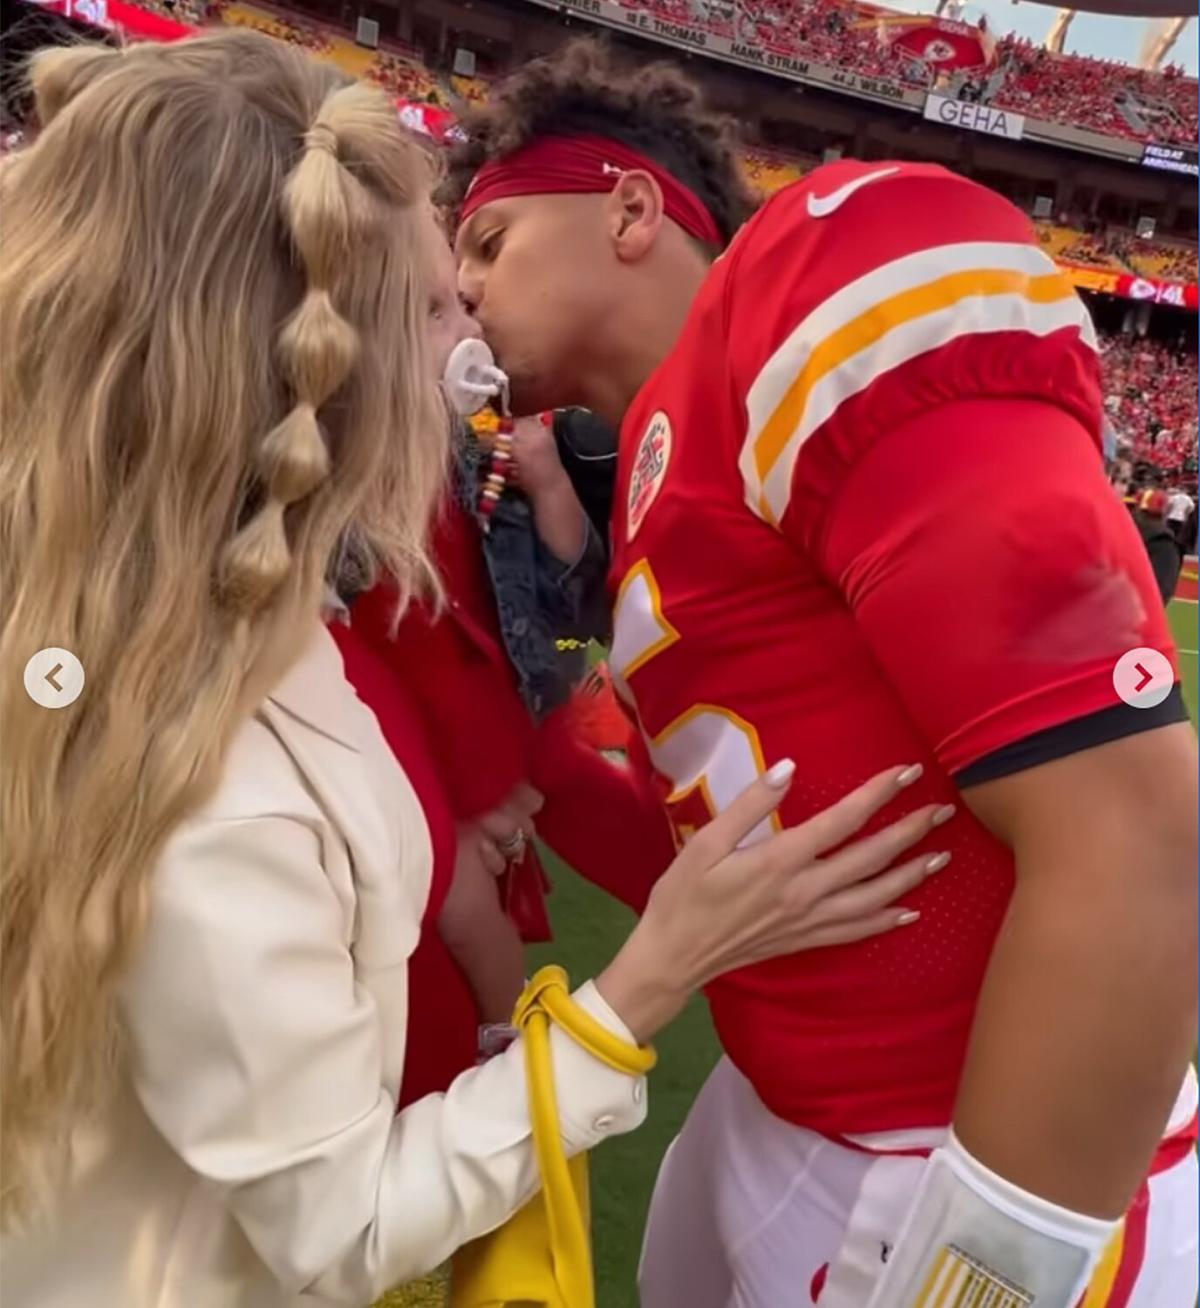 Pregnant Brittany Mahomes Matches Game Day Outfits with Sterling: Photos